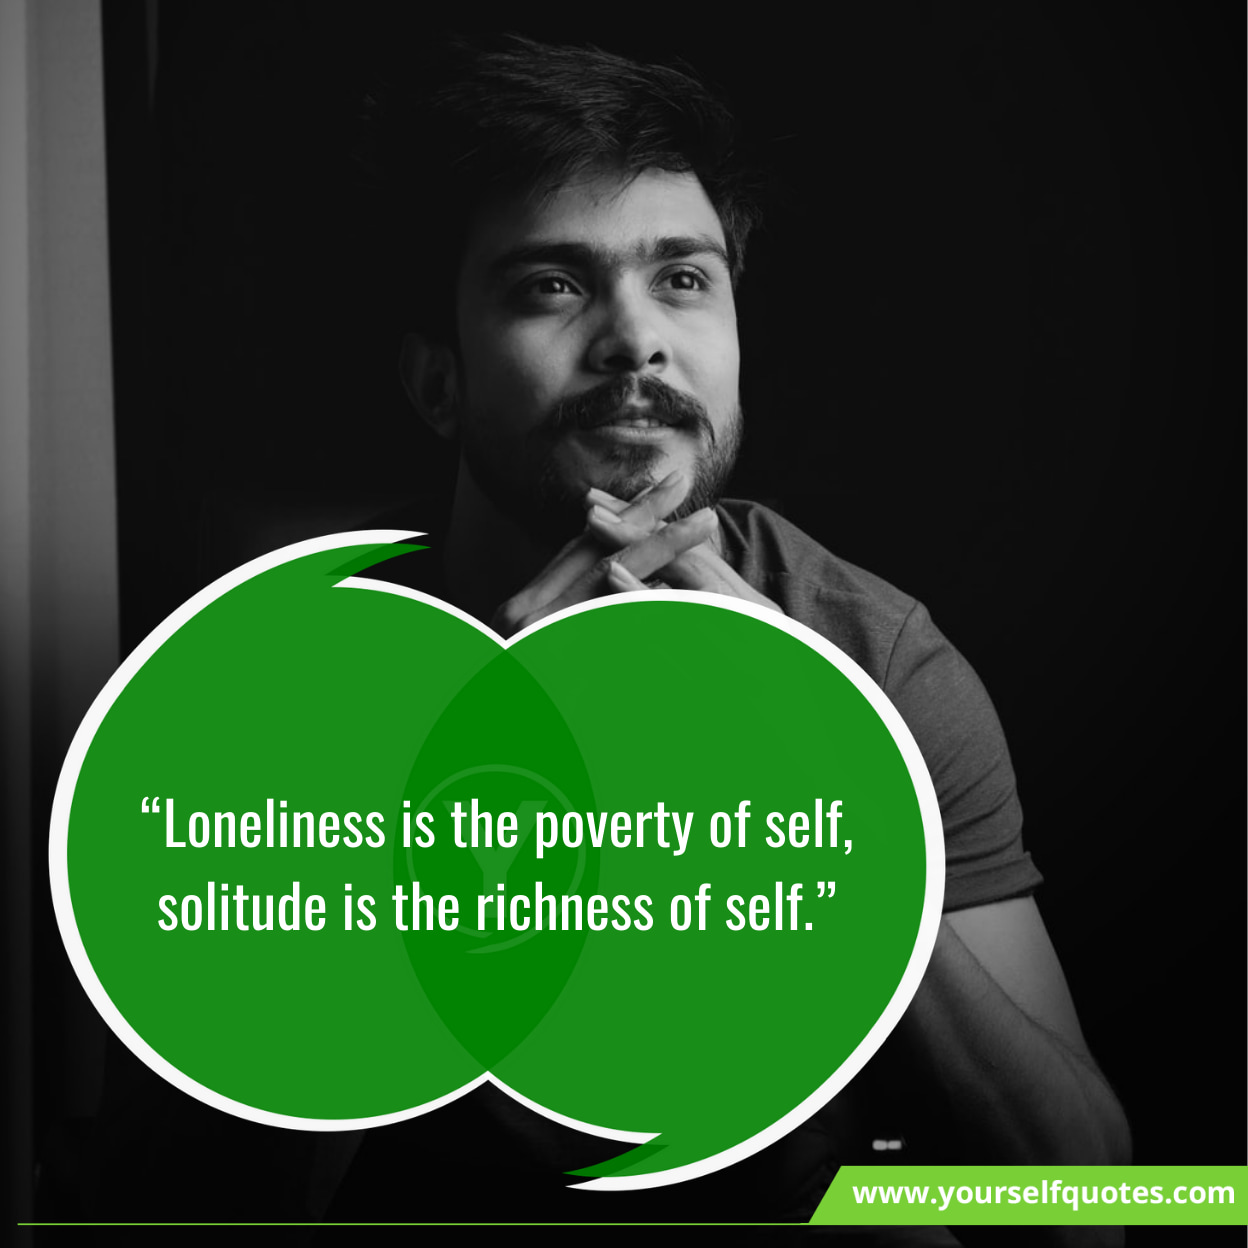 Inspiring Quotes About Being Alone